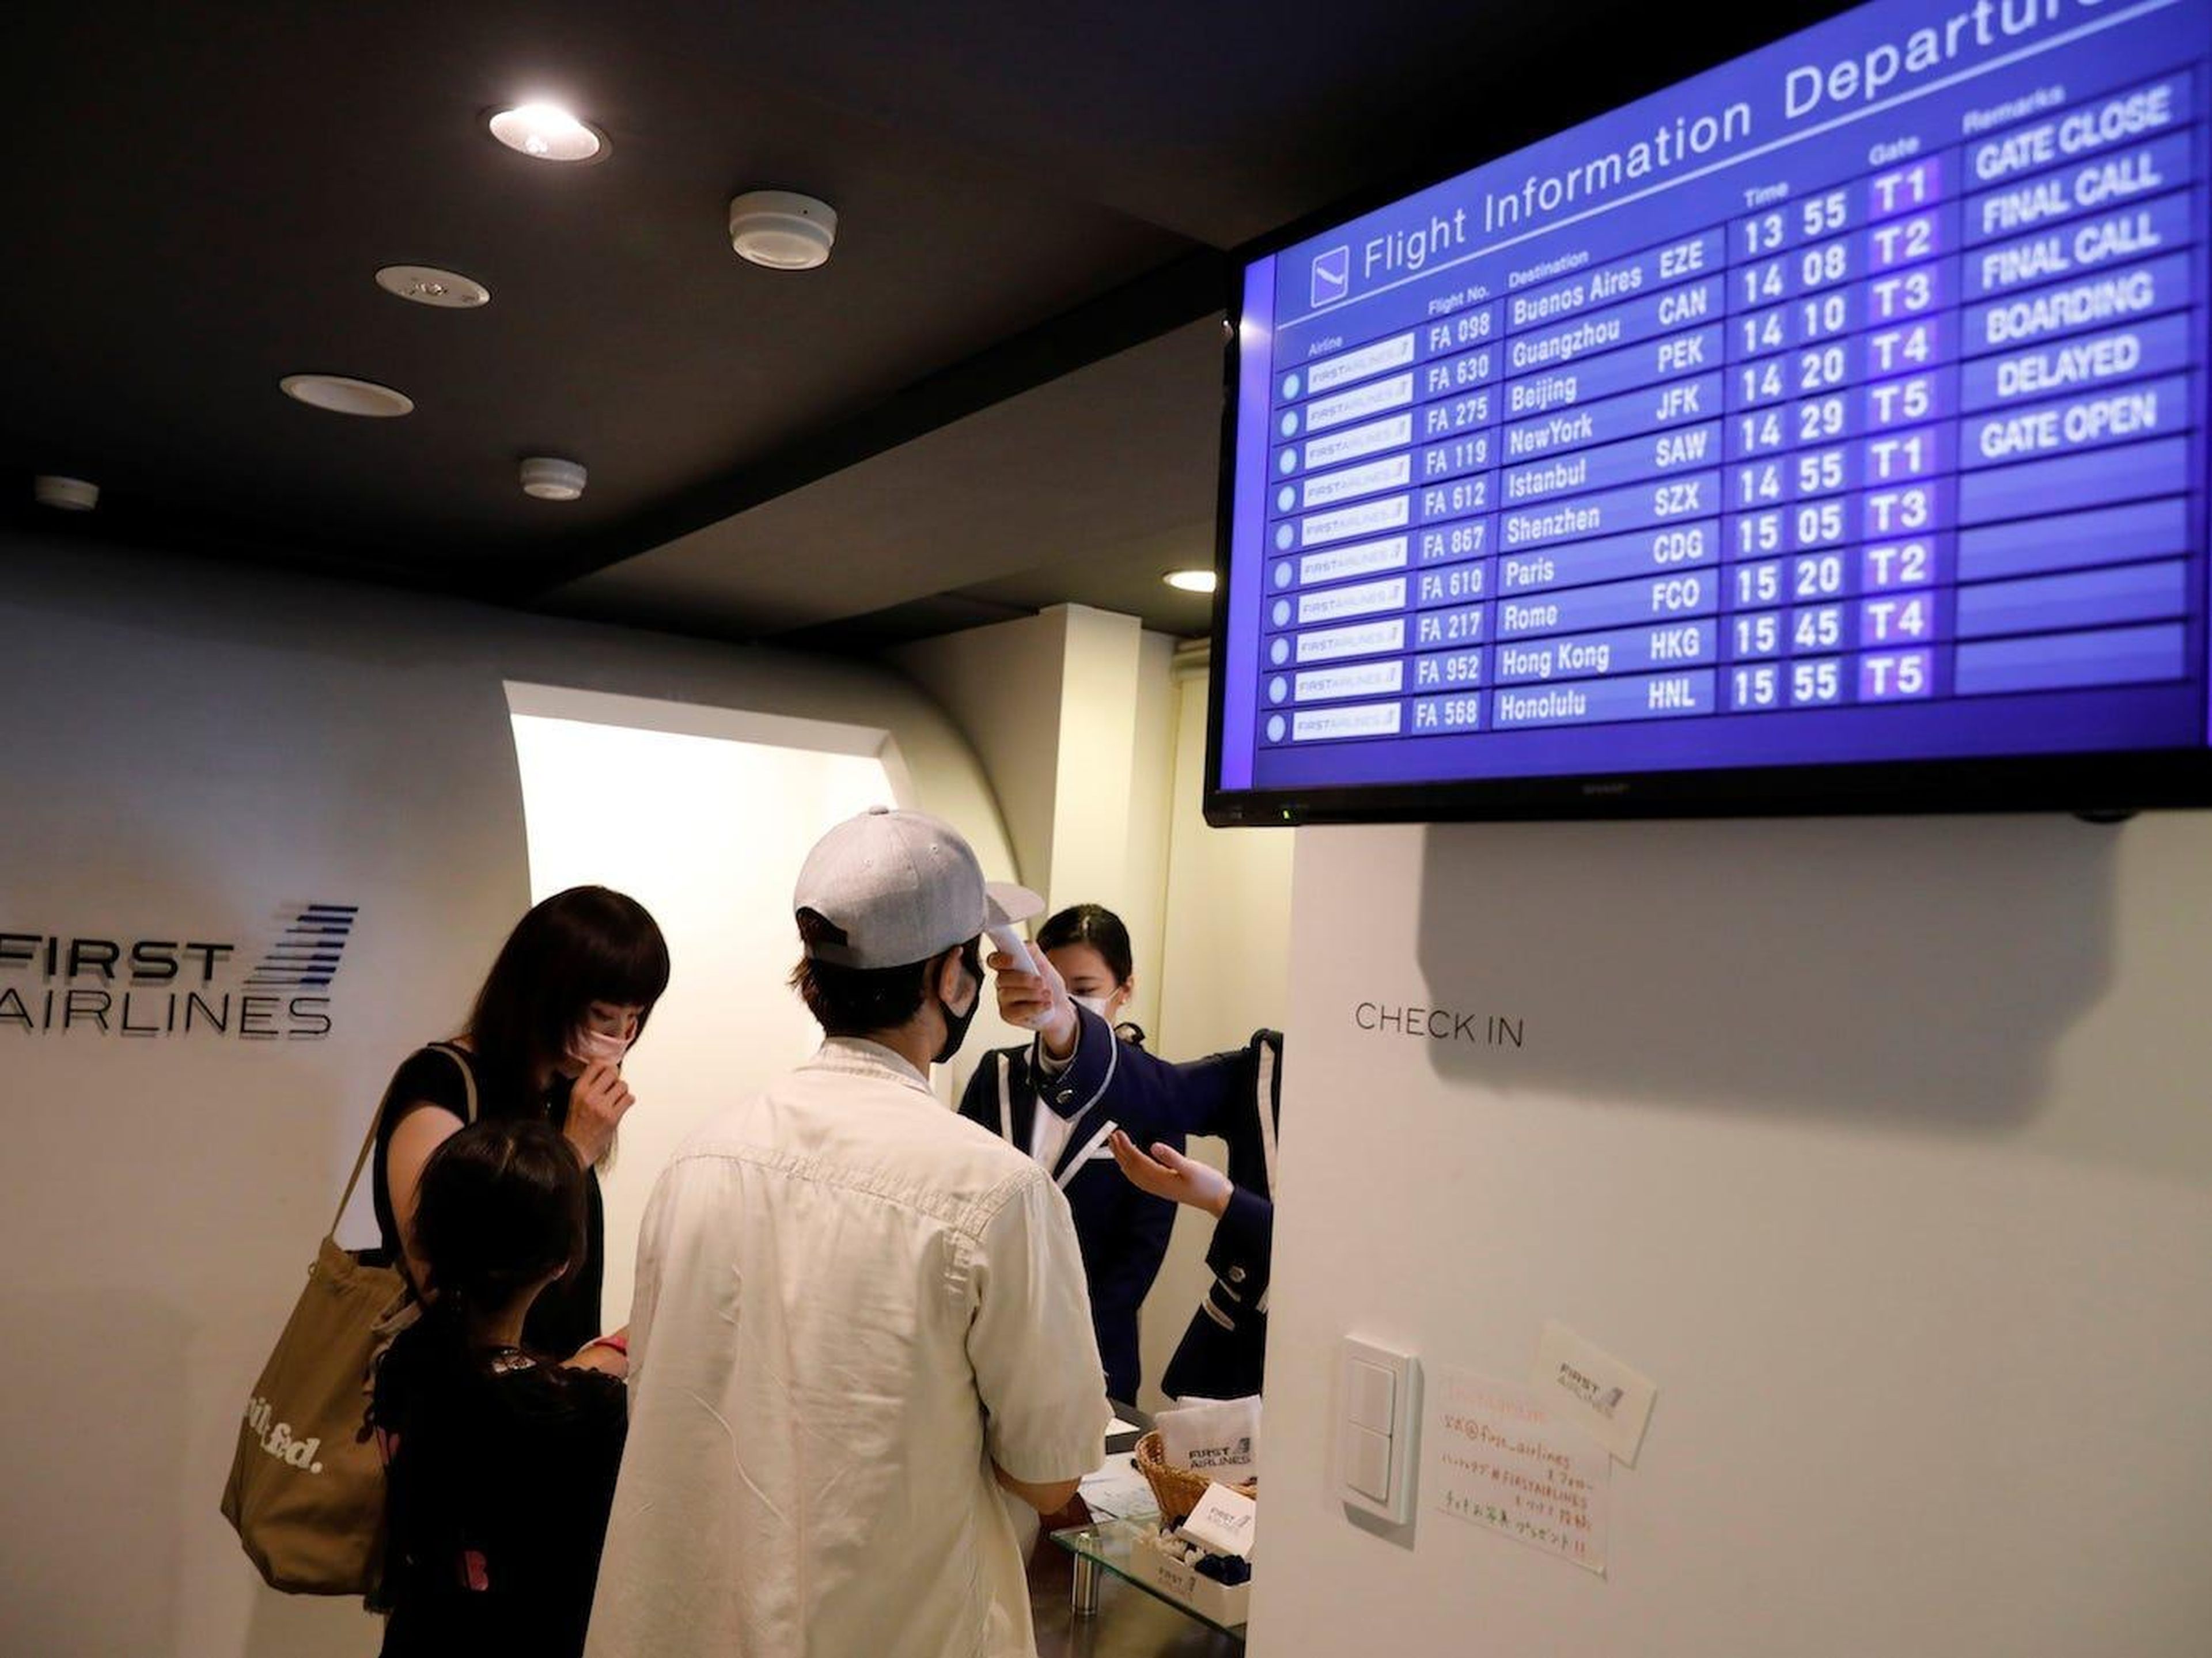 A staff dressed as a flight attendant checks temperature of a customer at a check-in desk at First Airlines in Tokyo, Japan, on August 12, 2020. Kim Kyung-Hoon/Reuters